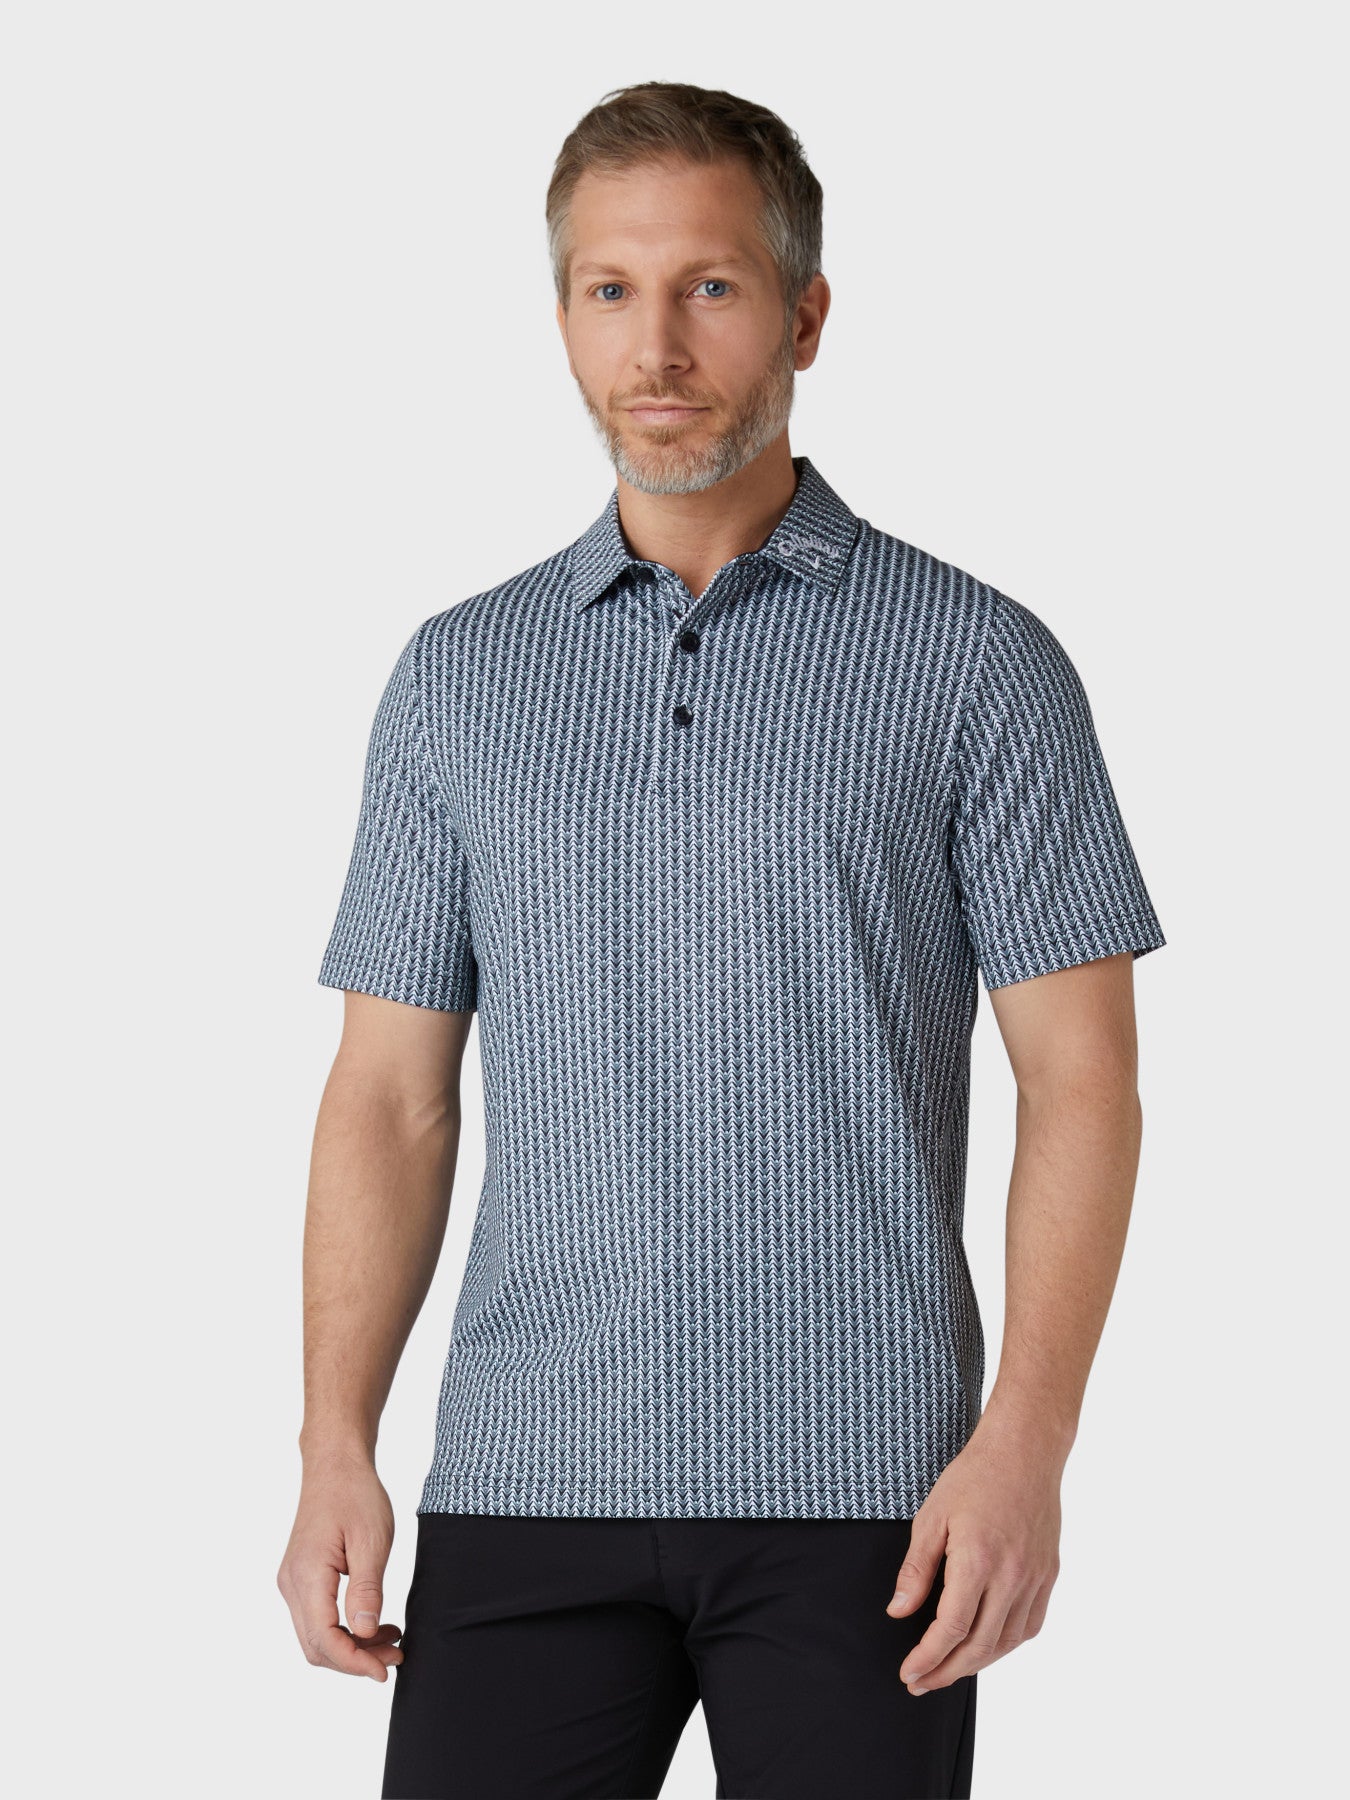 View Mens Chev And Ball All Over Print Polo In Caviar Caviar L information